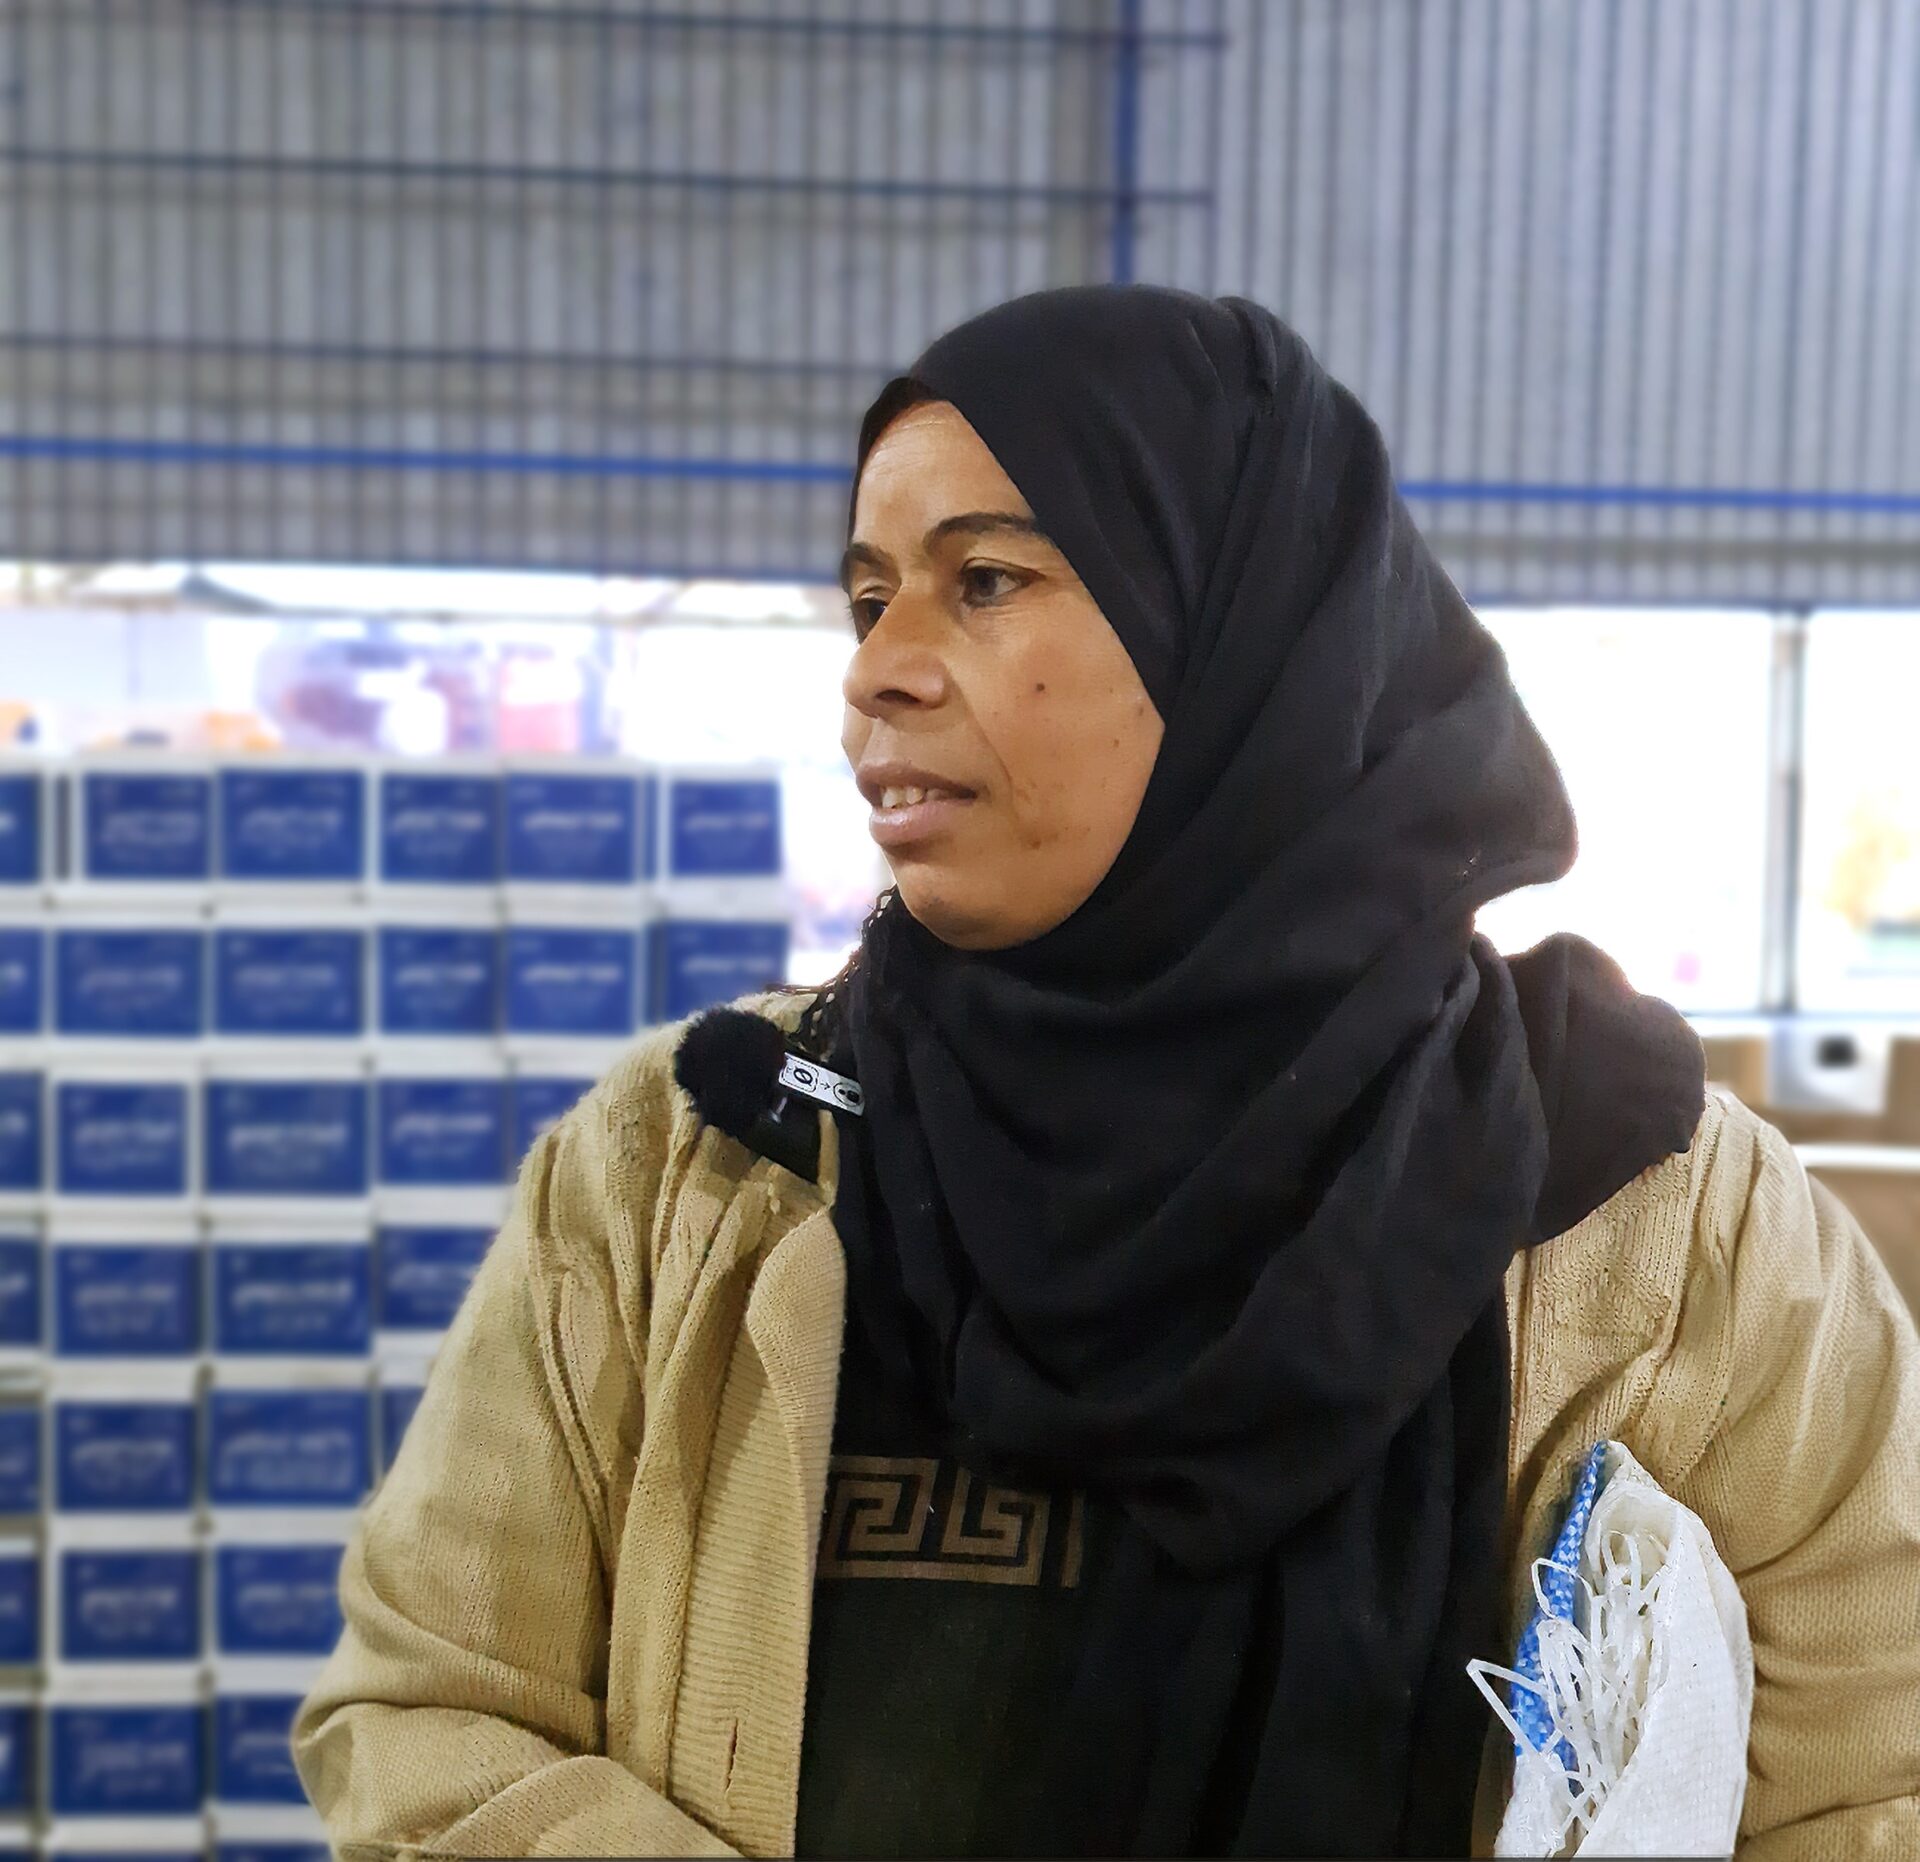 Souad, a Syrian refugee, lost all her belongings in the flooding.